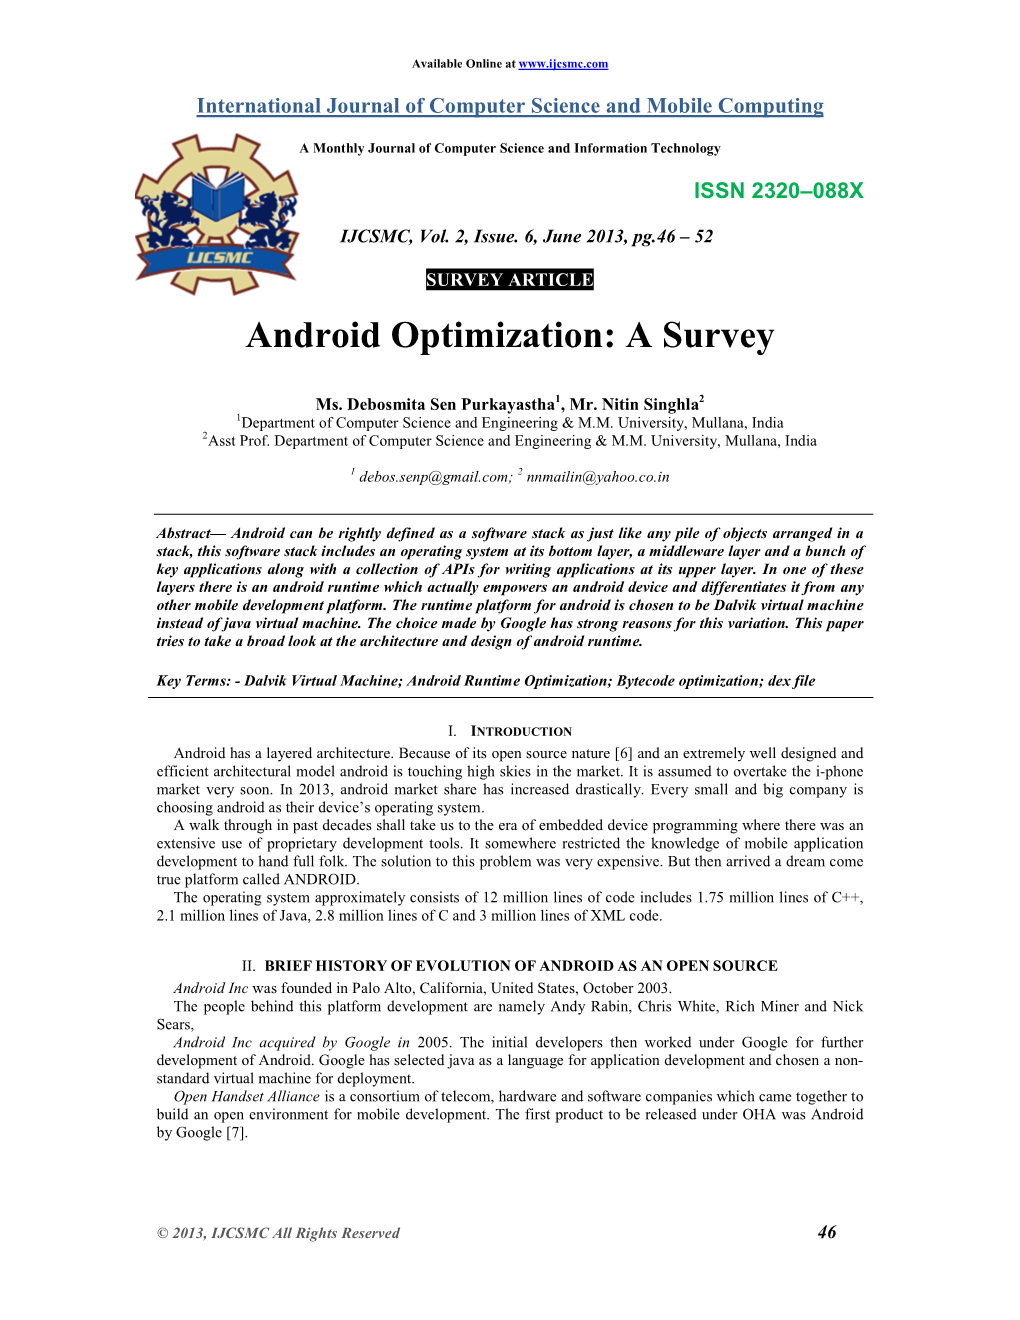 Android Optimization: a Survey